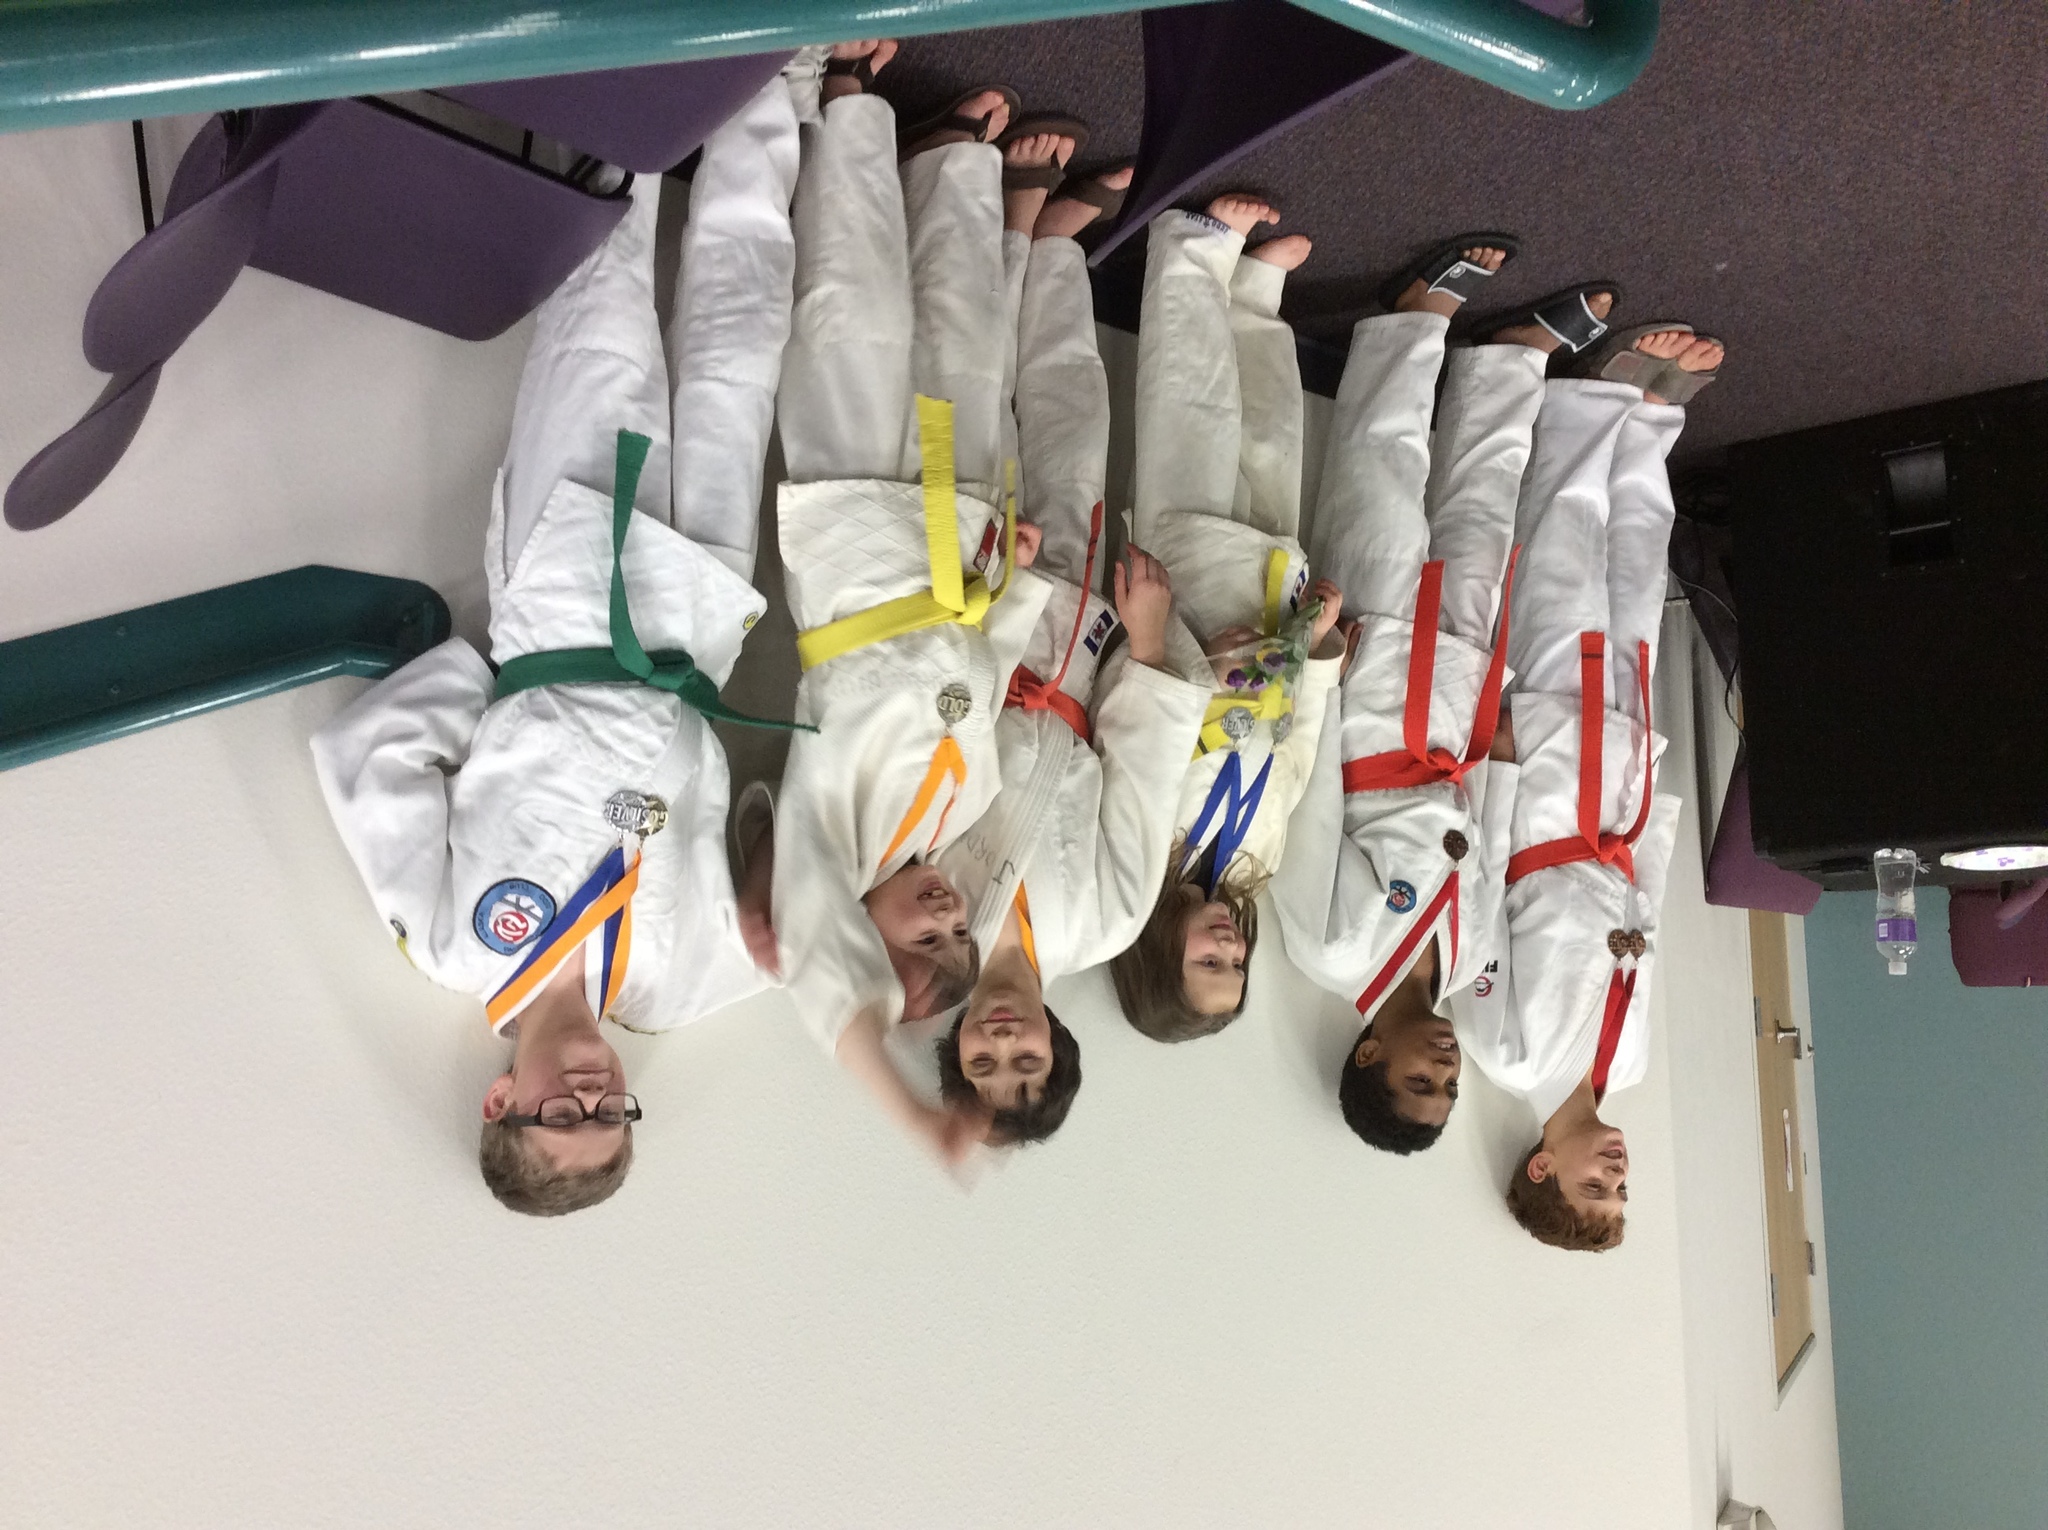 Busy month for Sterling Judo Club